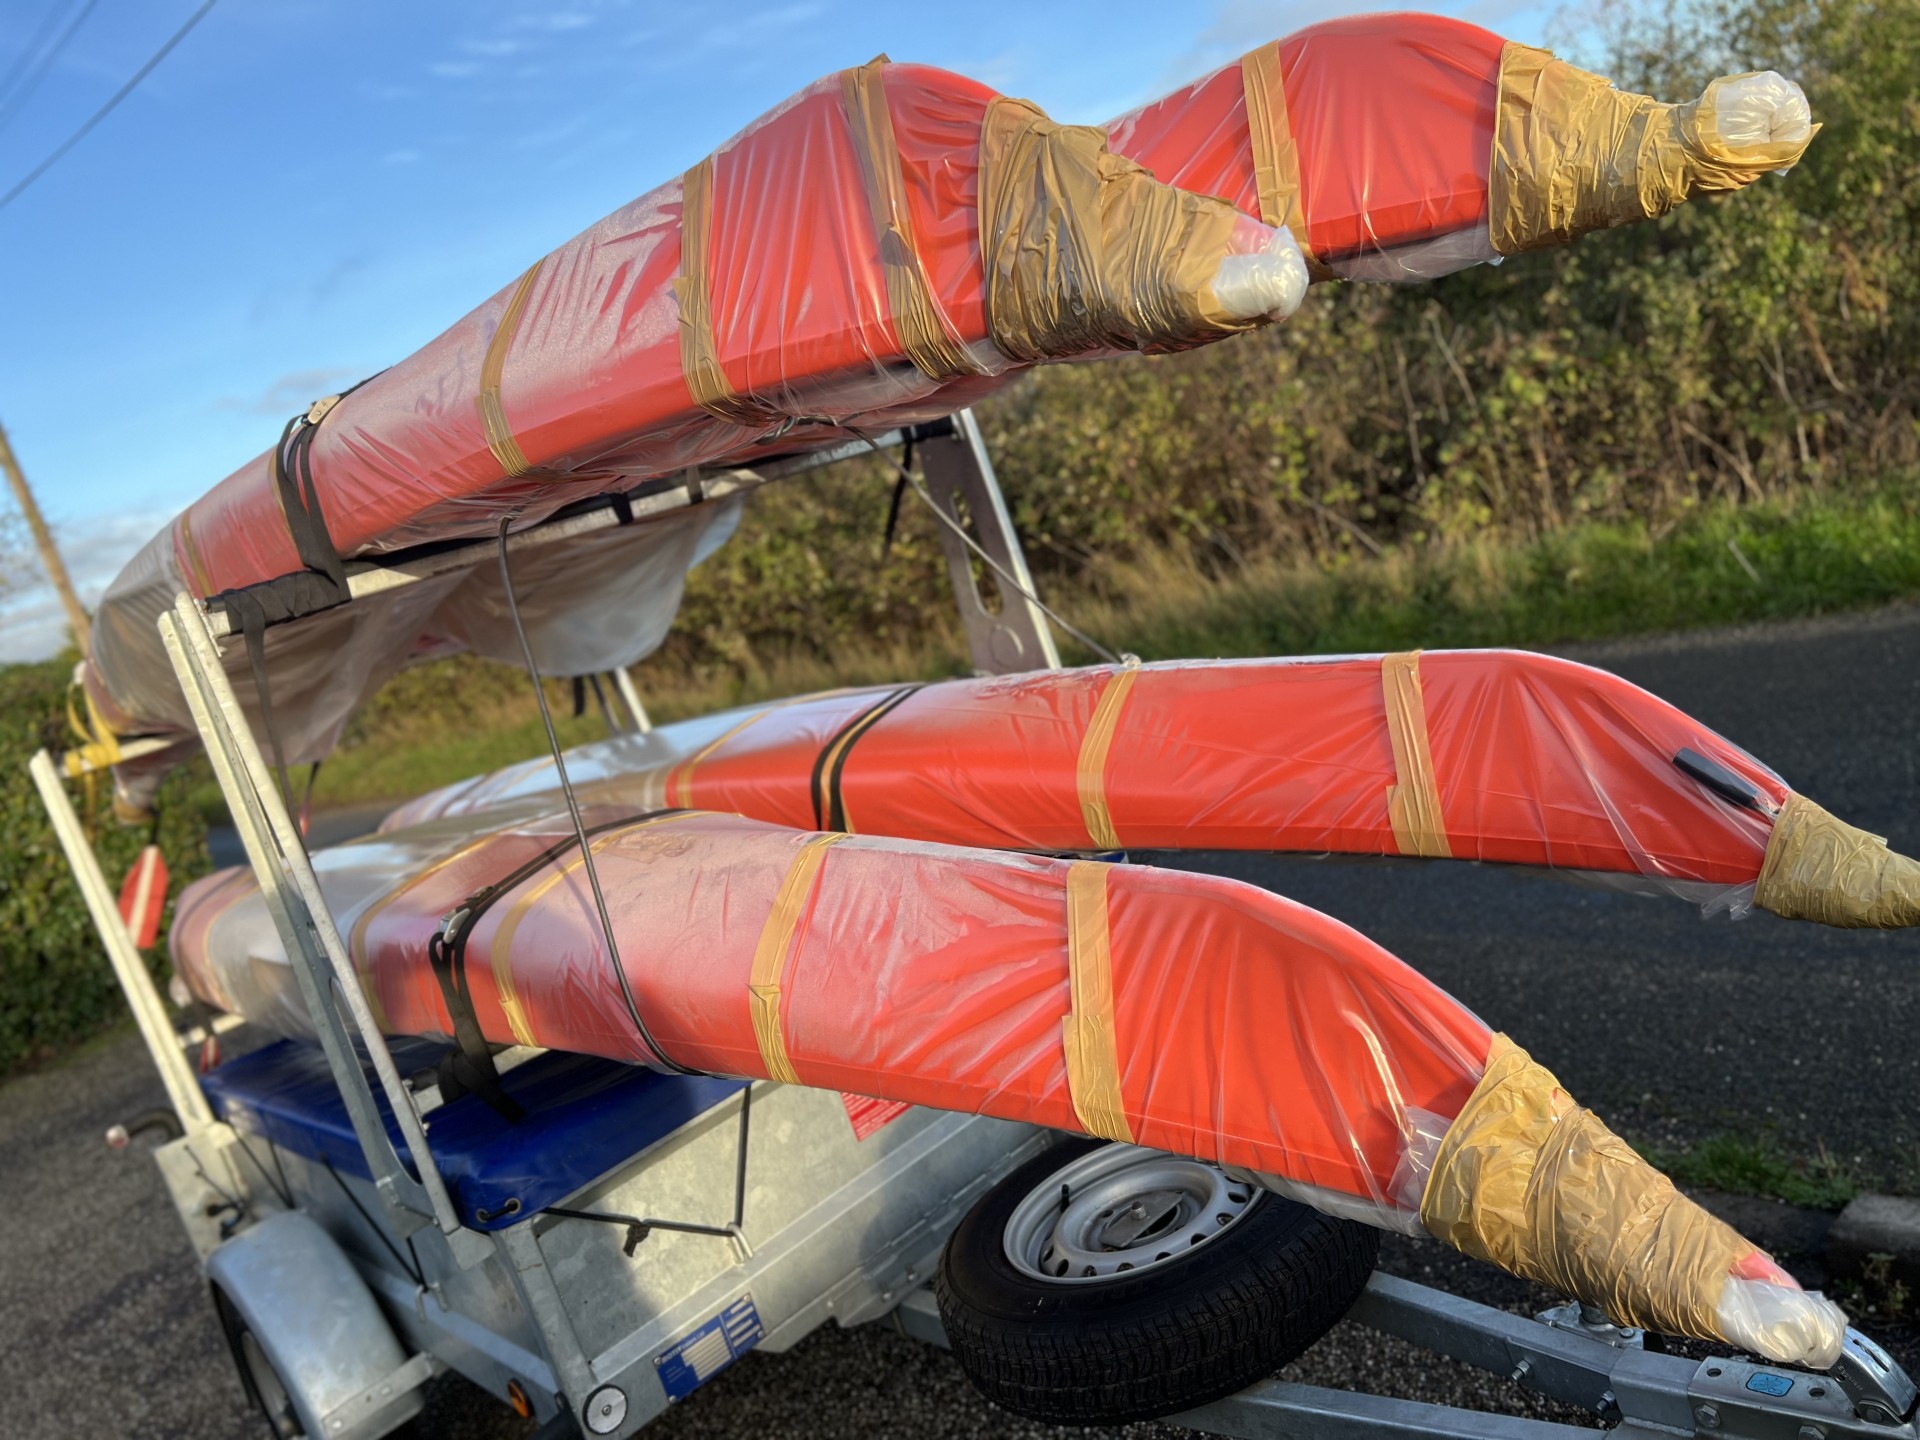 New sea kayaks in packaging on a trailer.